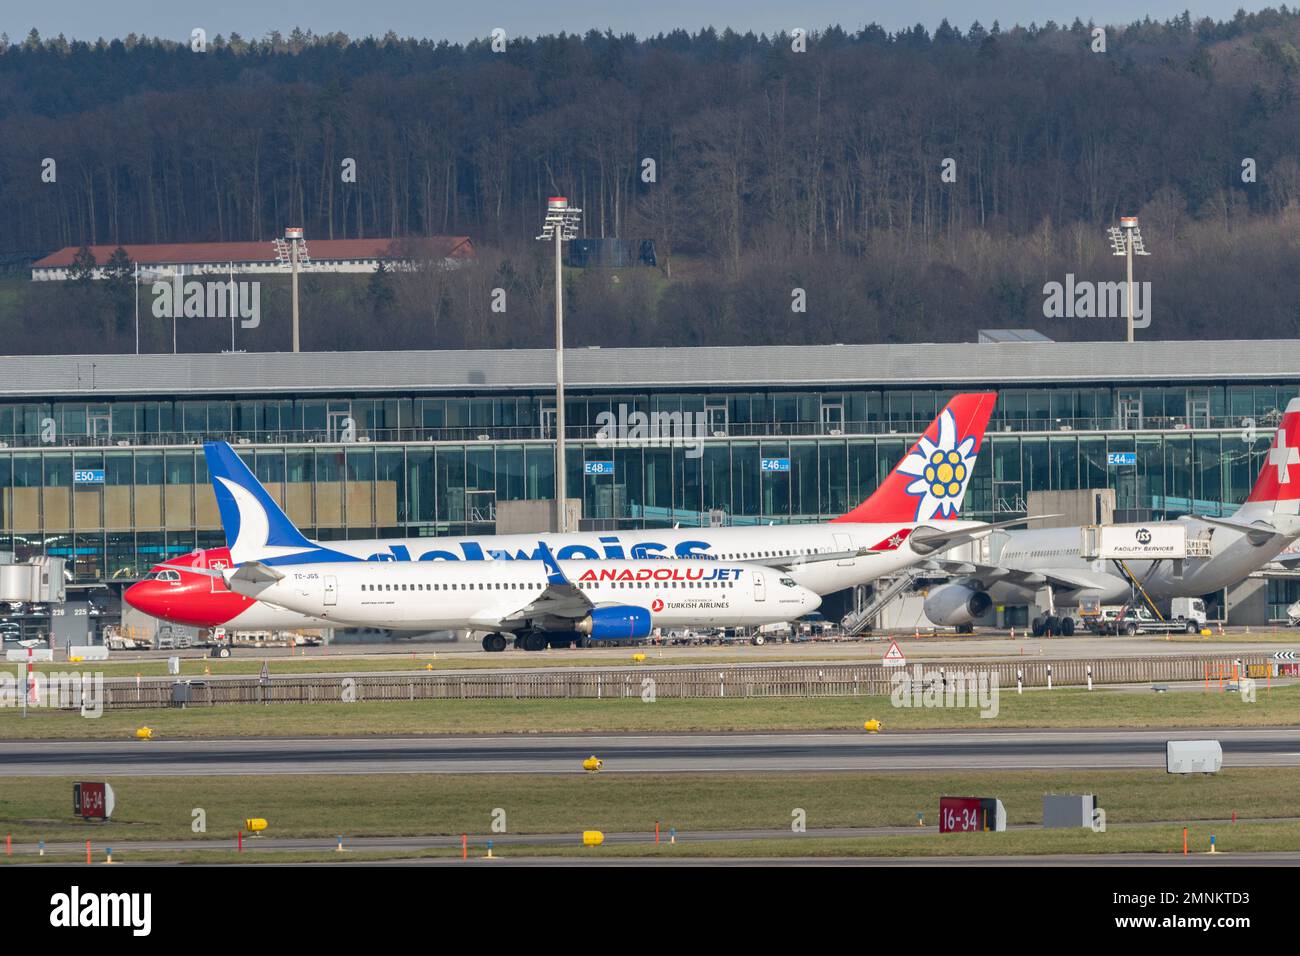 Zurich, Switzerland, January 19, 2023 Anadolu jet Boeing 737-8F2 aircraft is taxiing to its position Stock Photo